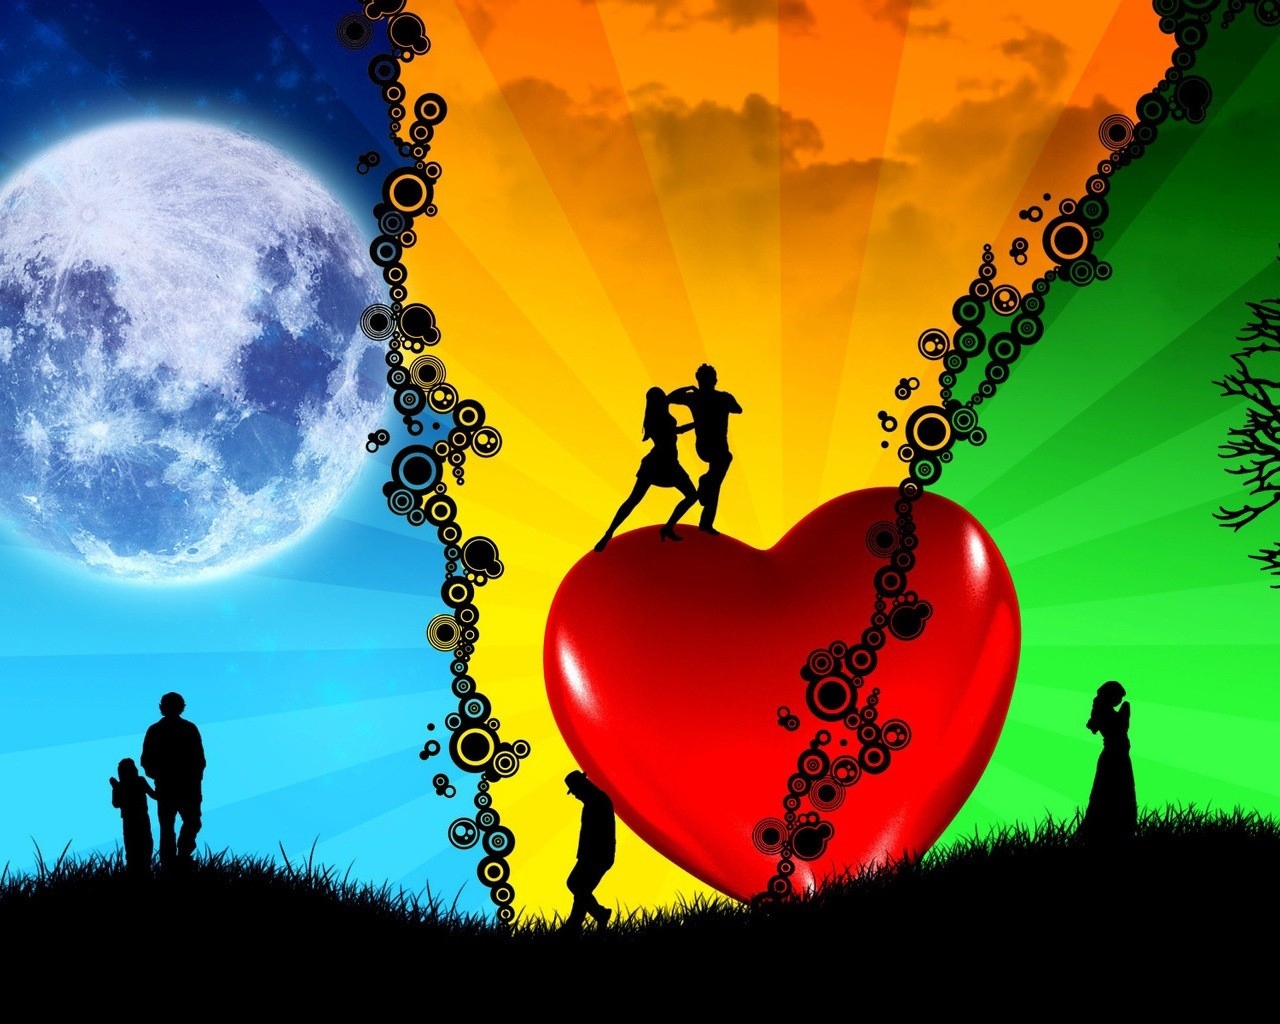 Related Wallpapers Passion, Peace - Beautiful Love Image Full Hd , HD Wallpaper & Backgrounds